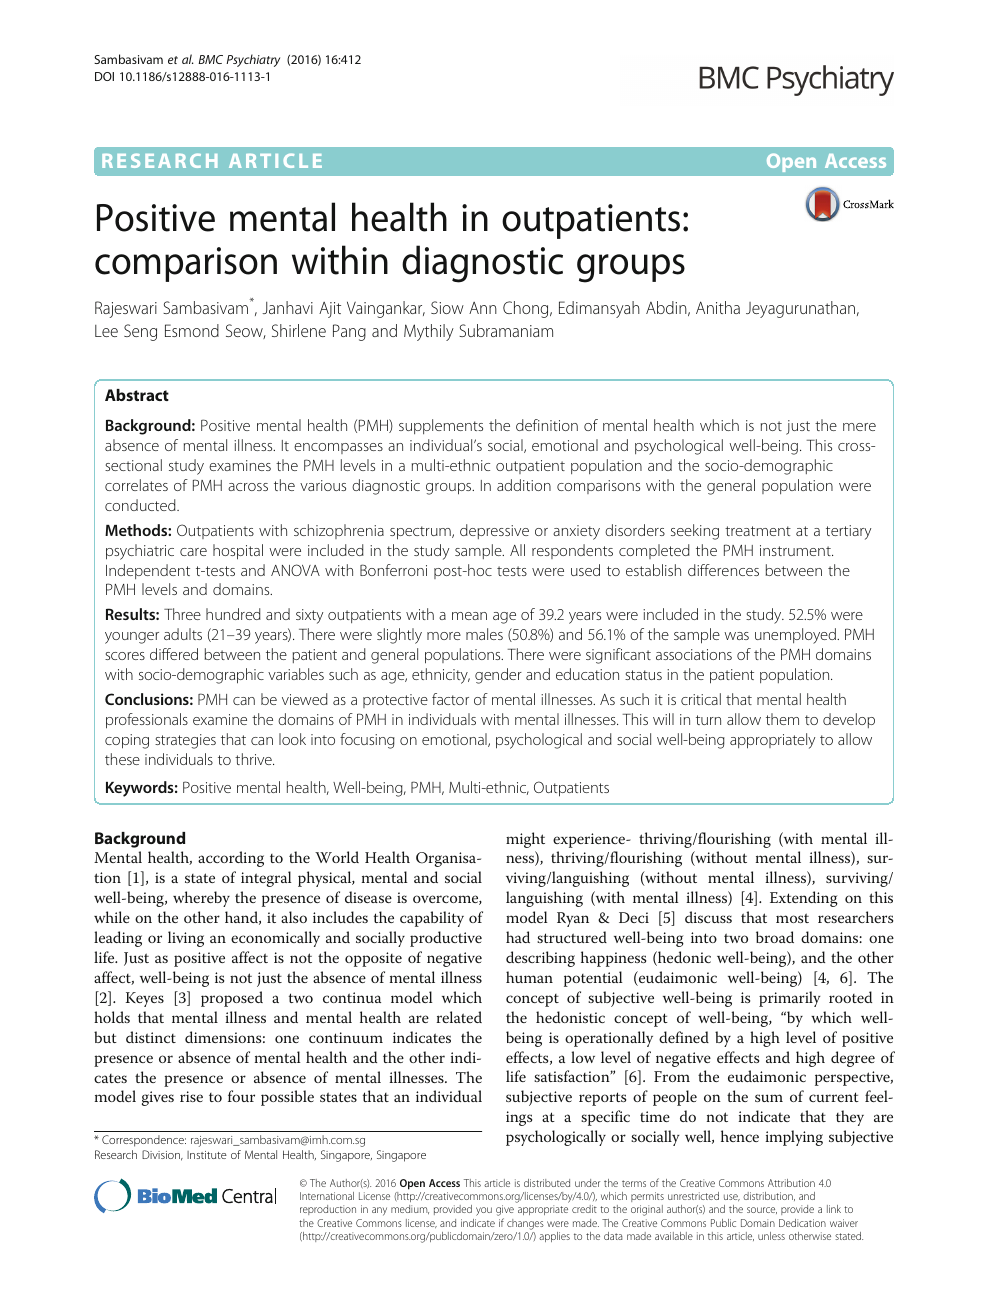 Development and Validation of a Mental Wellbeing Scale in Singapore